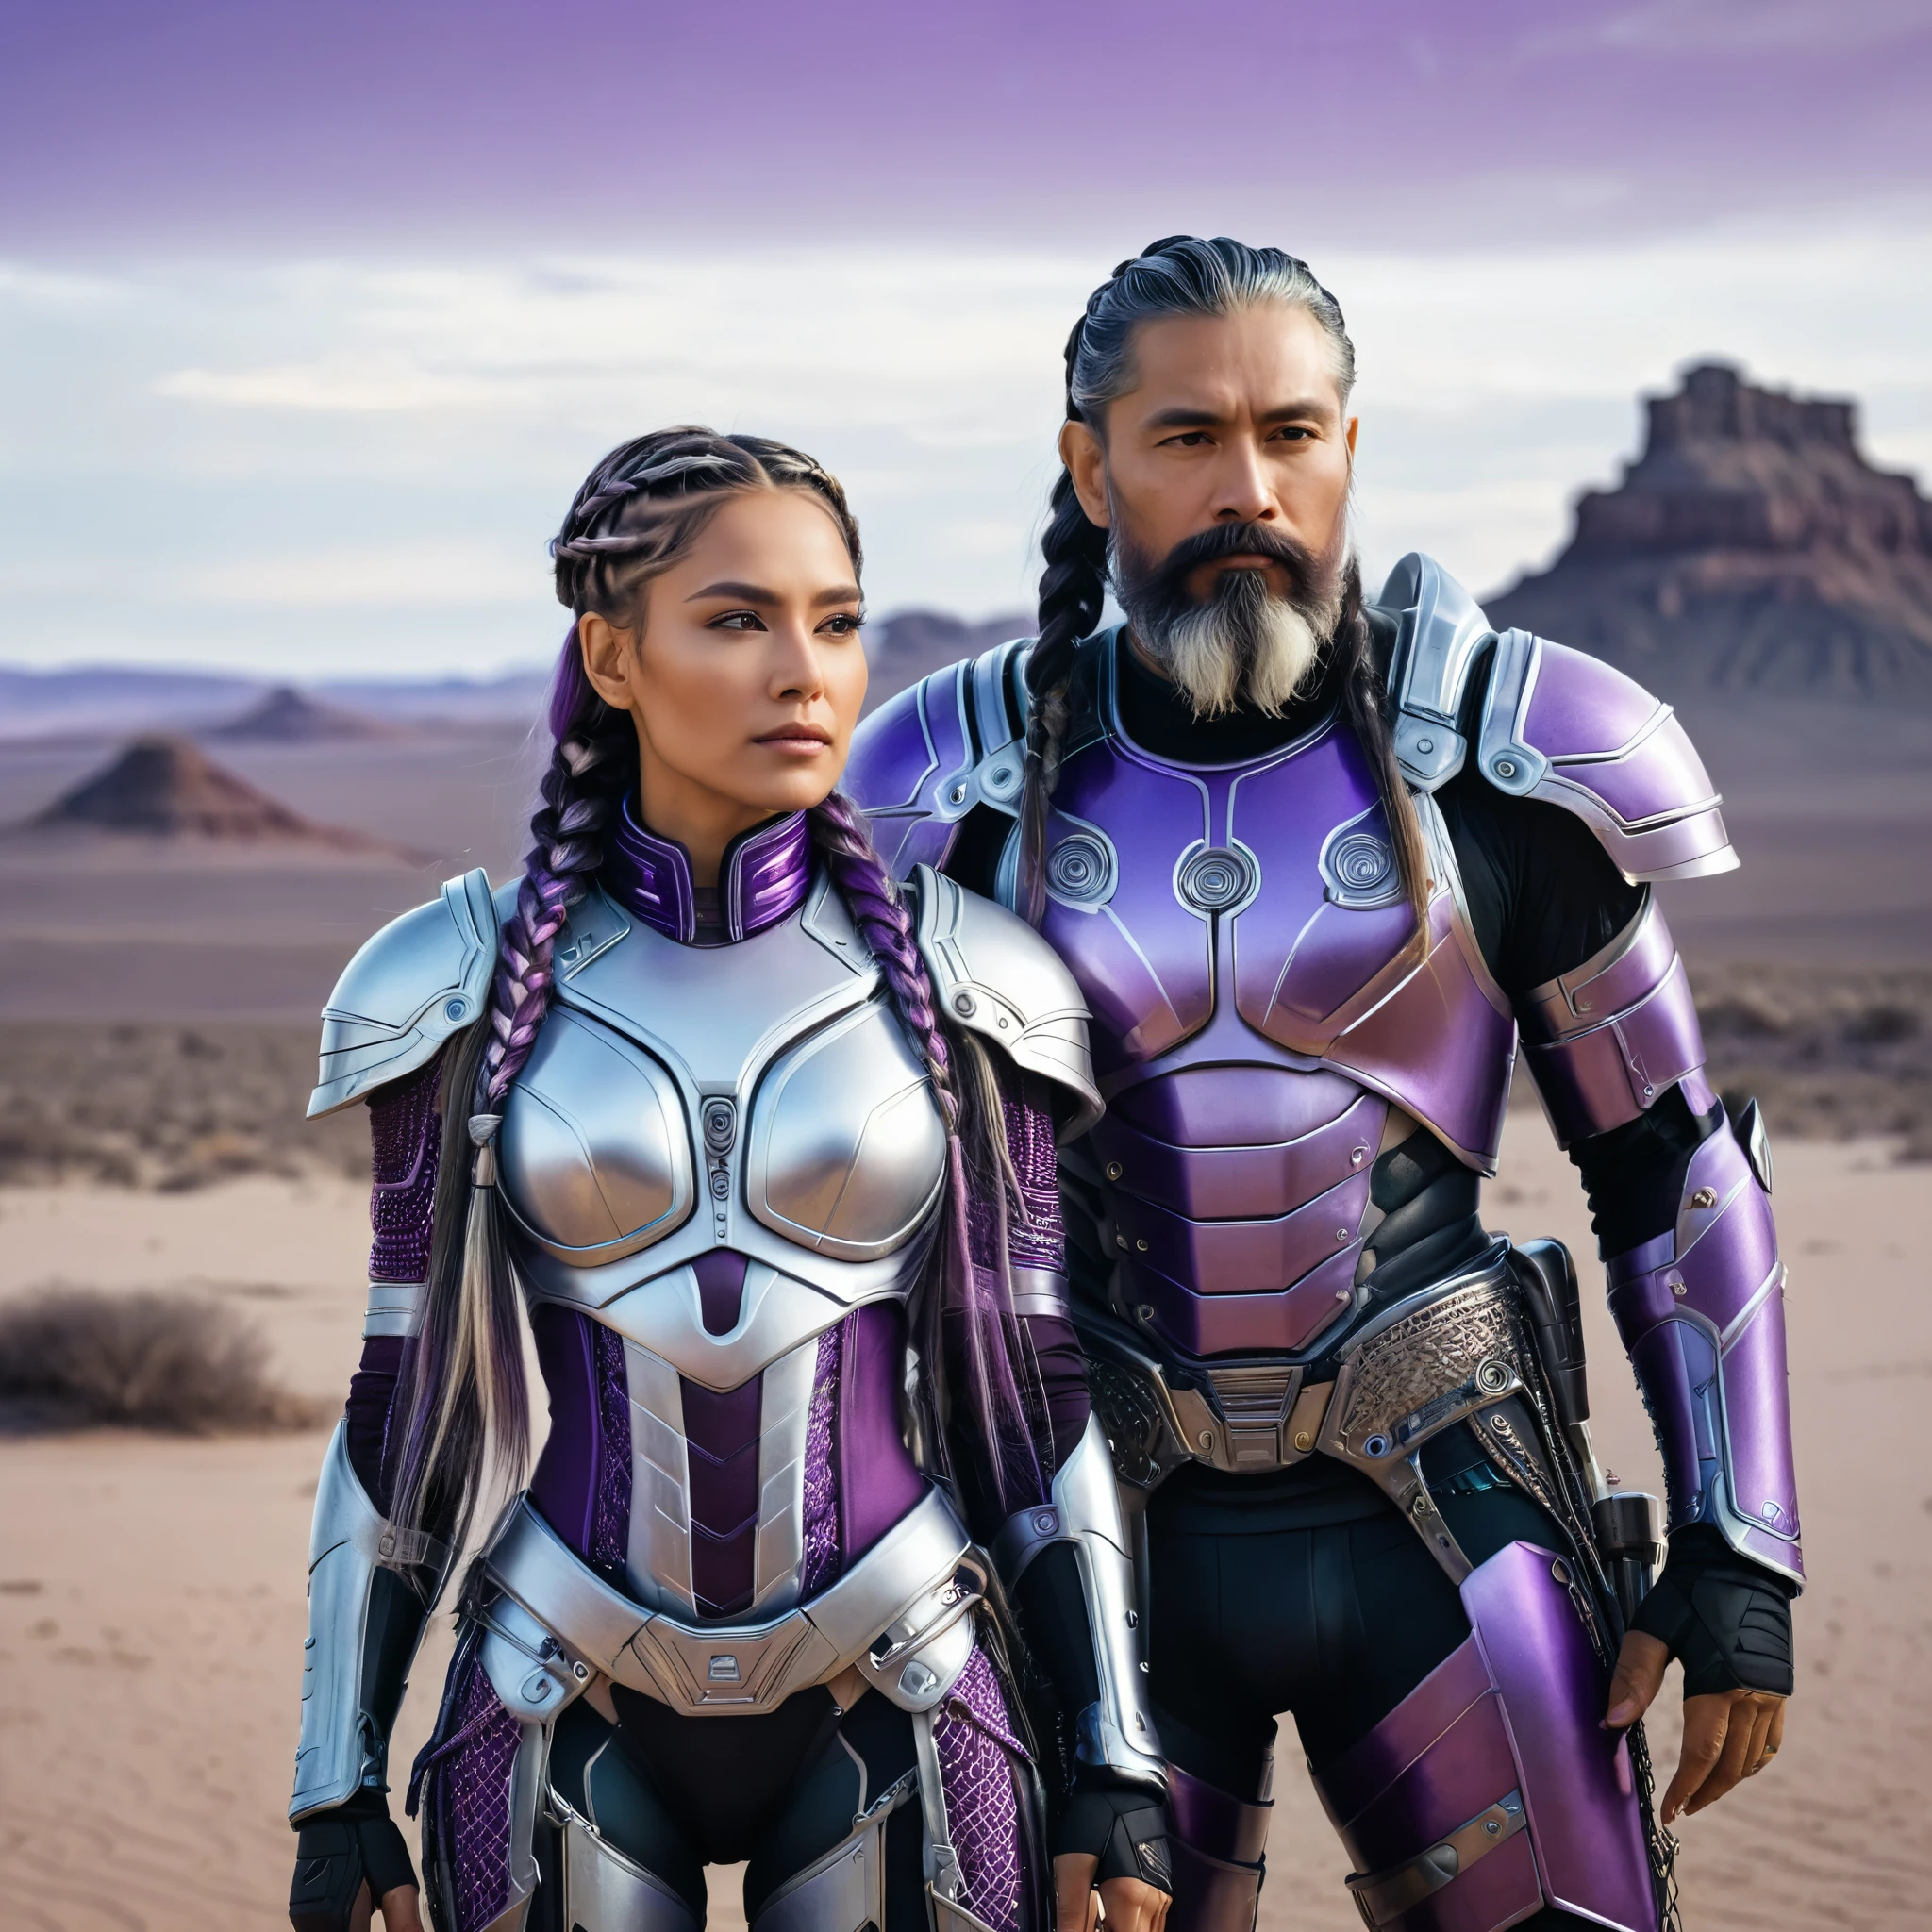 (((Double portrait))), A stunningly realistic depiction of a couple, 1Women, 36 years old, ((long braided hairs)), ((purple white gradient hairs)), wearing futuristic full body cybernetic armor, 1Man, 36 years old, wearing futuristic rusty armor, Perfect beard on Man's face, Both are standing on a desolate alien landscape, 